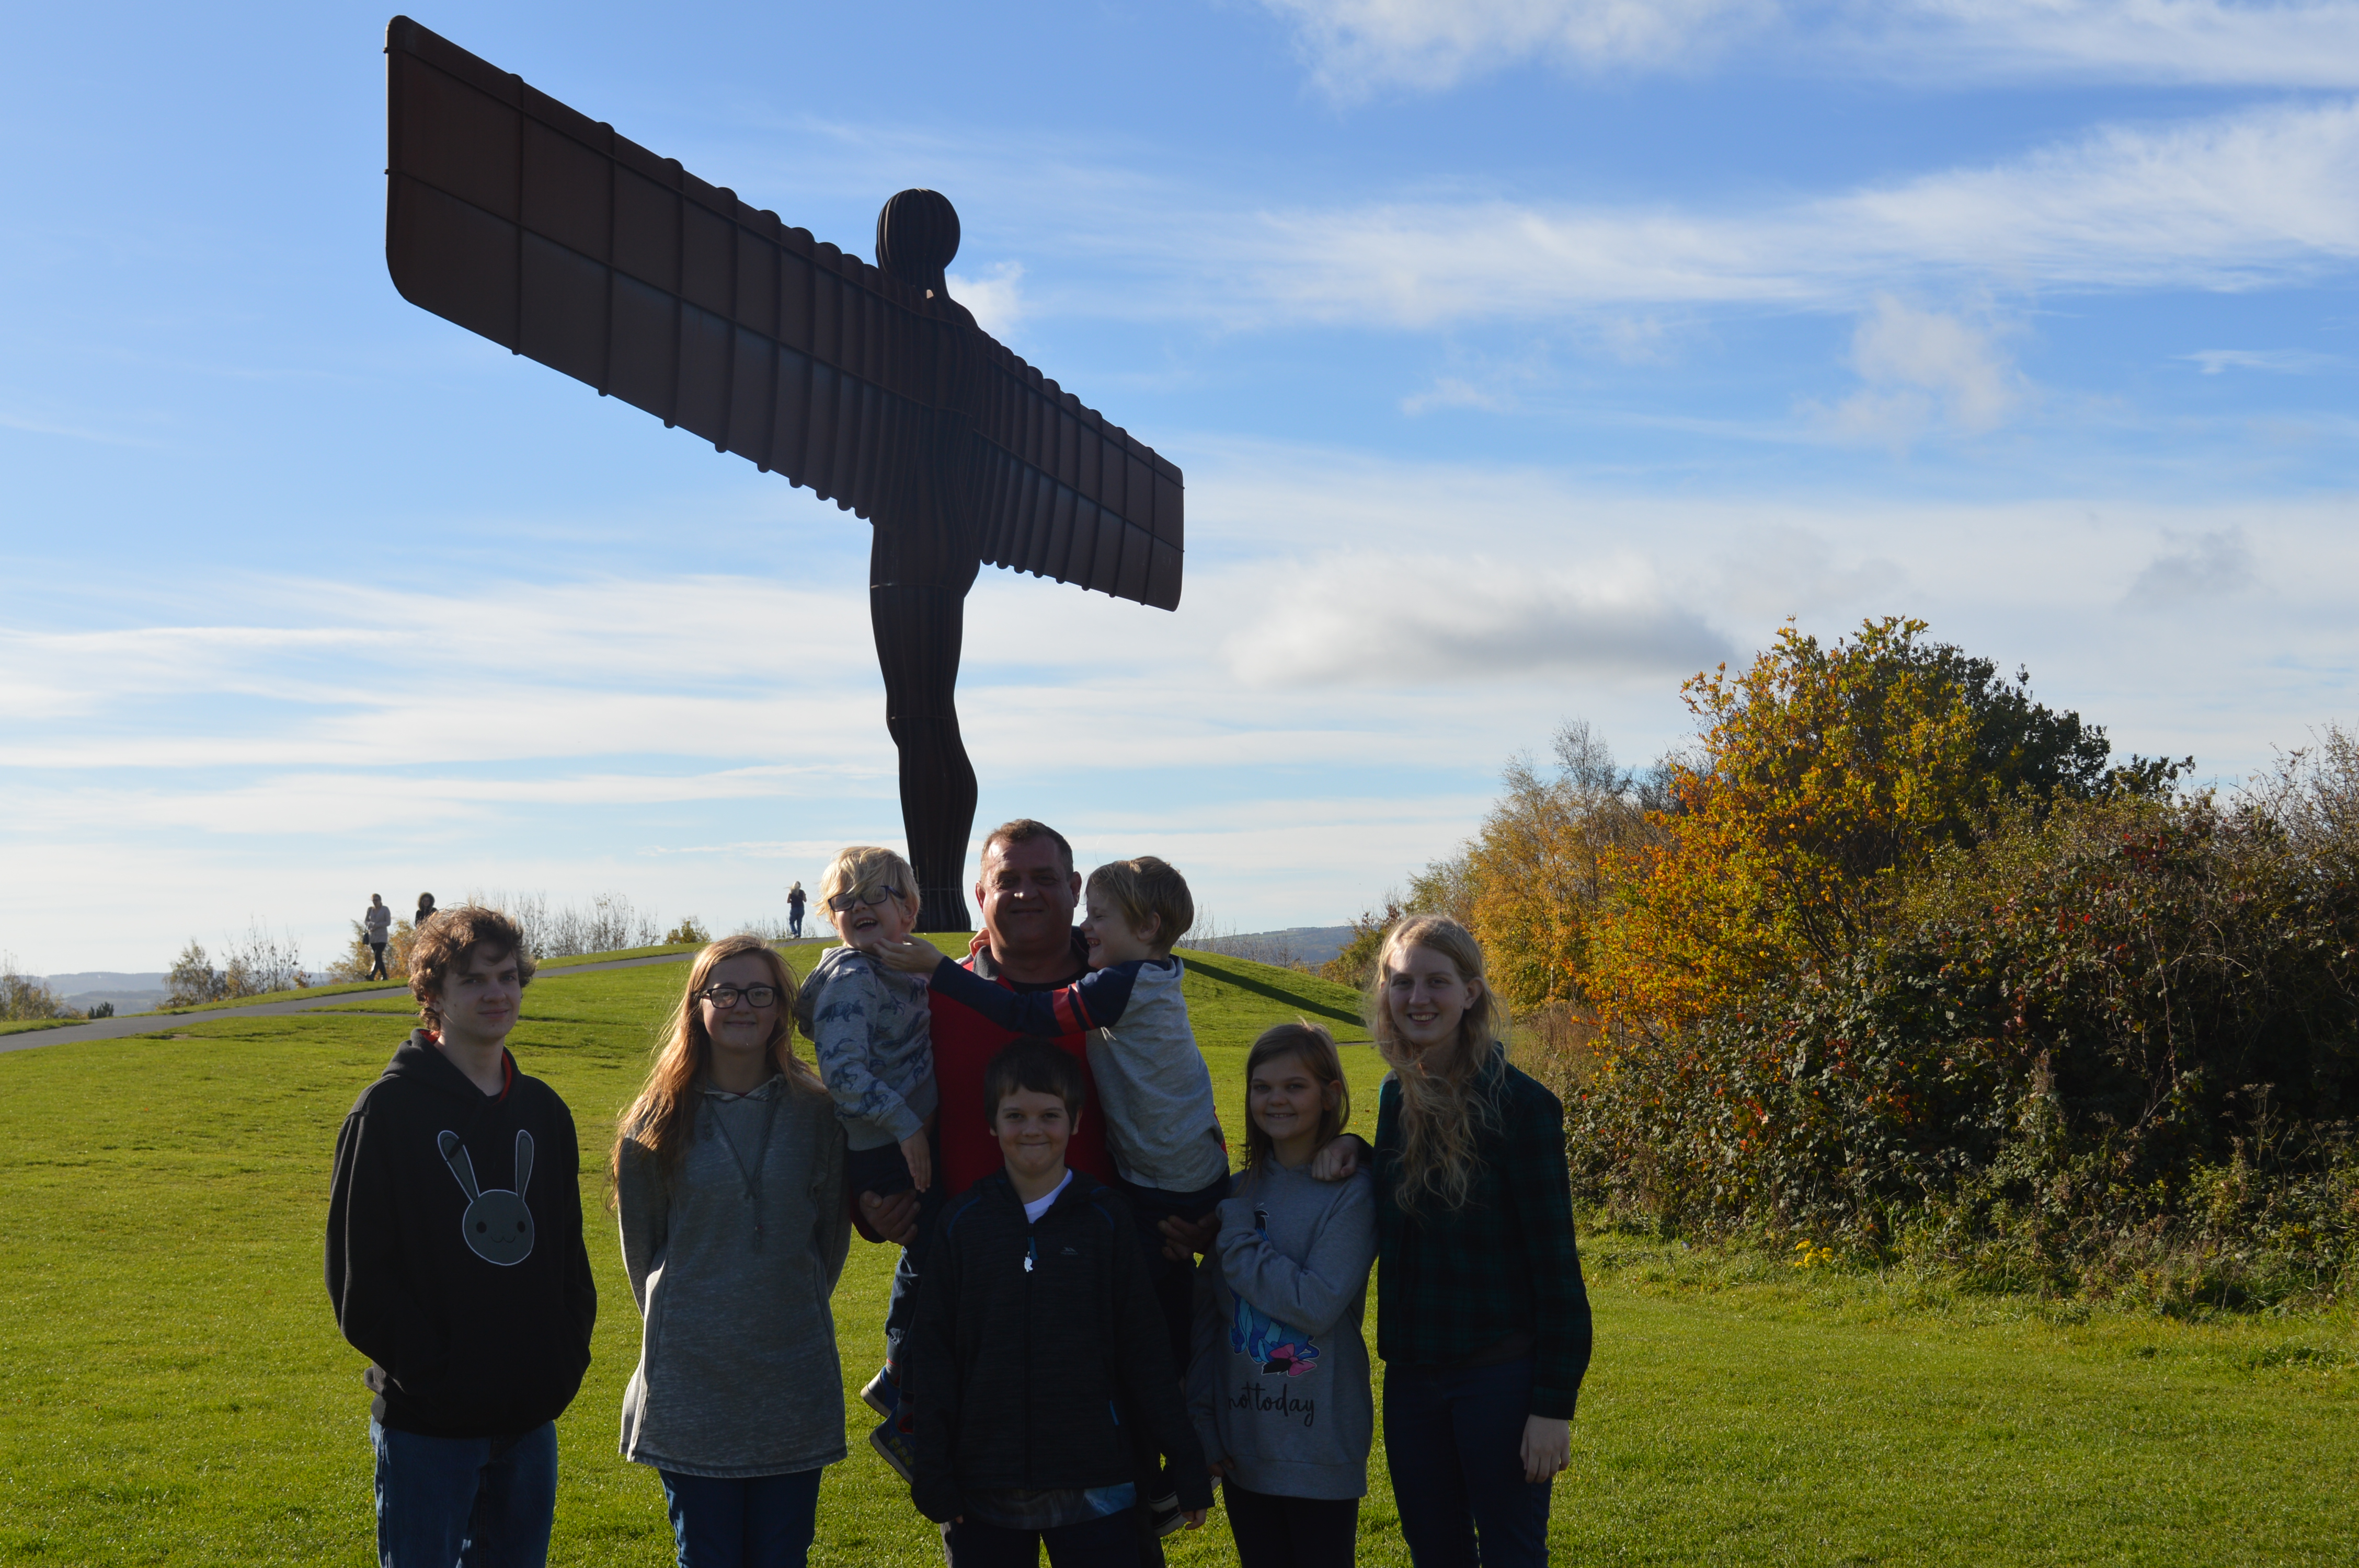 Family photo with angel of the north in the background on a A day trip to Newcastle